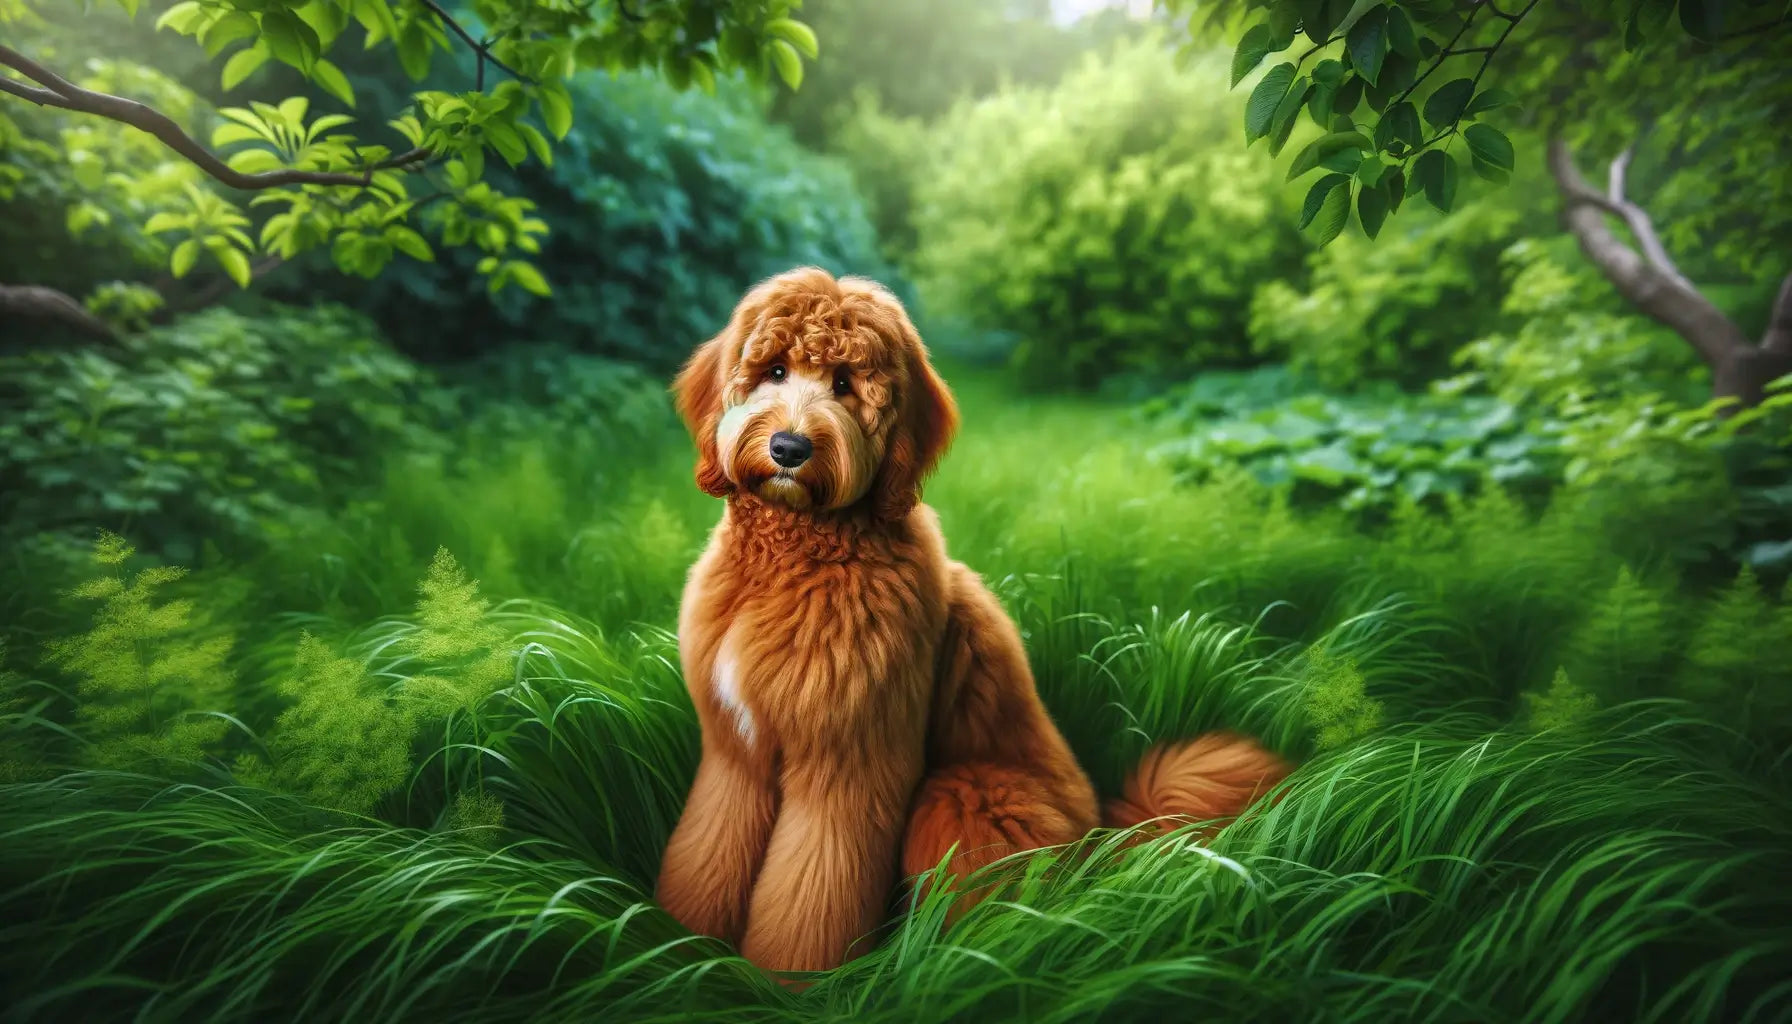 A Red Goldendoodle sitting in lush greenery, its rich red coat standing out against the vibrant background of grass and leaves.